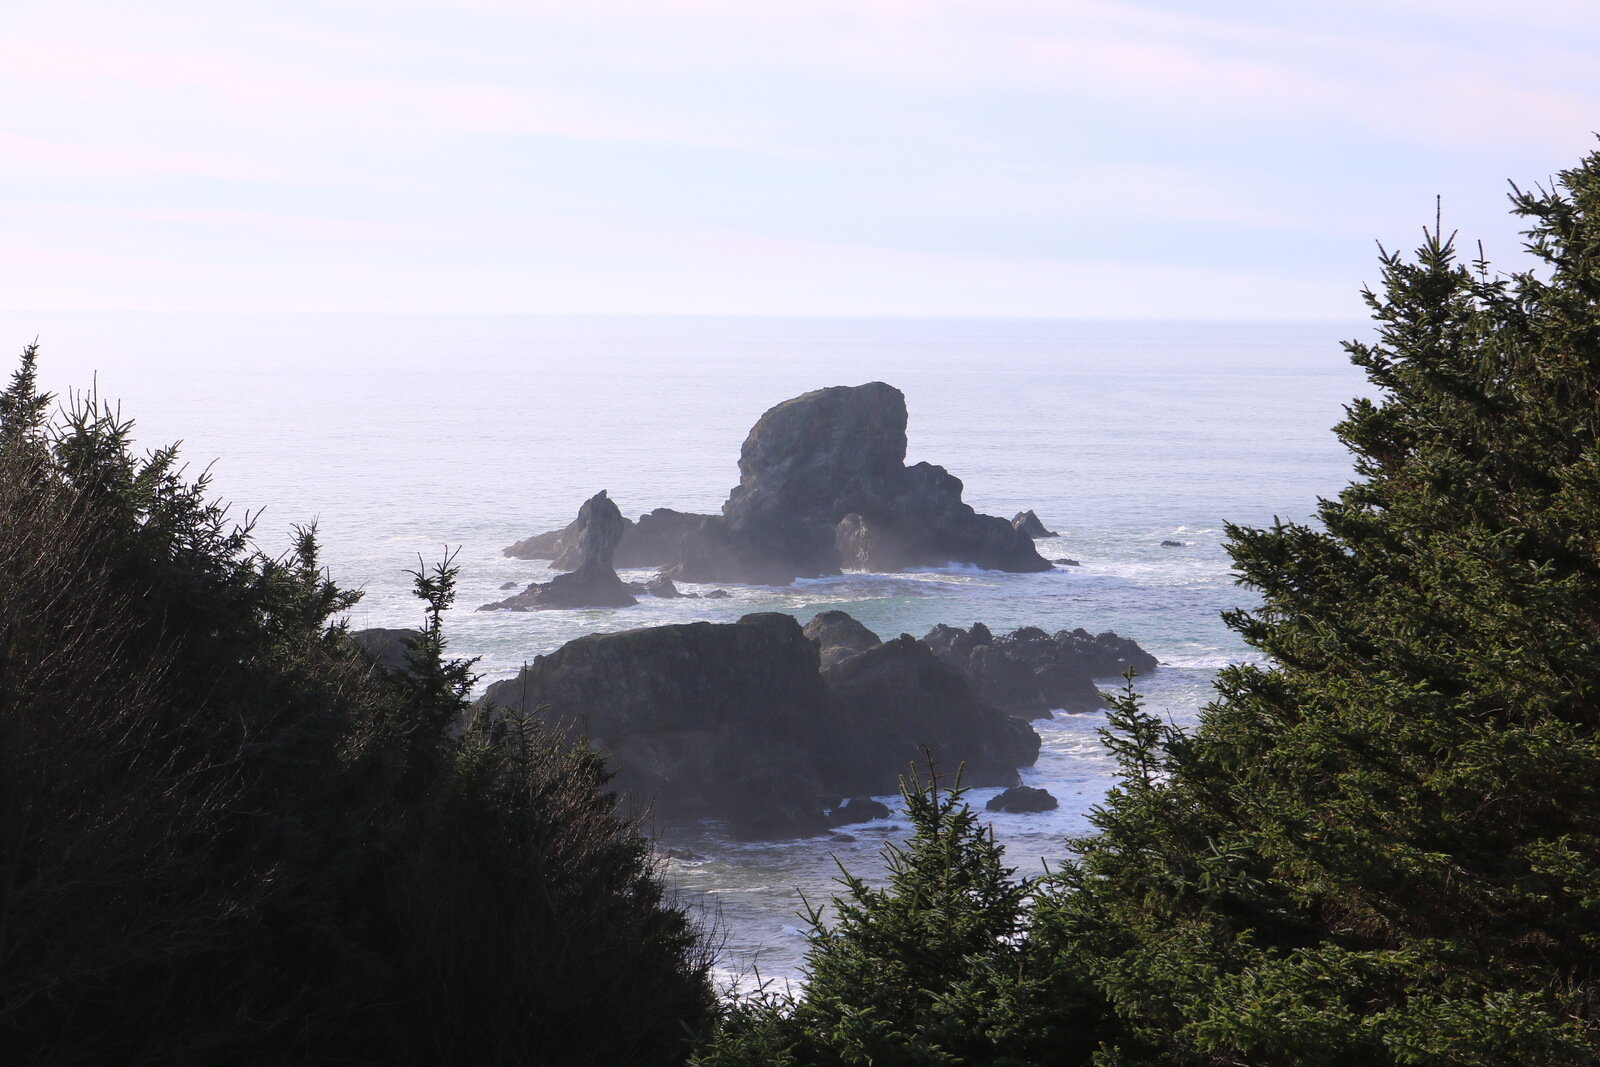 A dark rock jutting out of the ocean just off the coast at Ecola State Park viewpoint